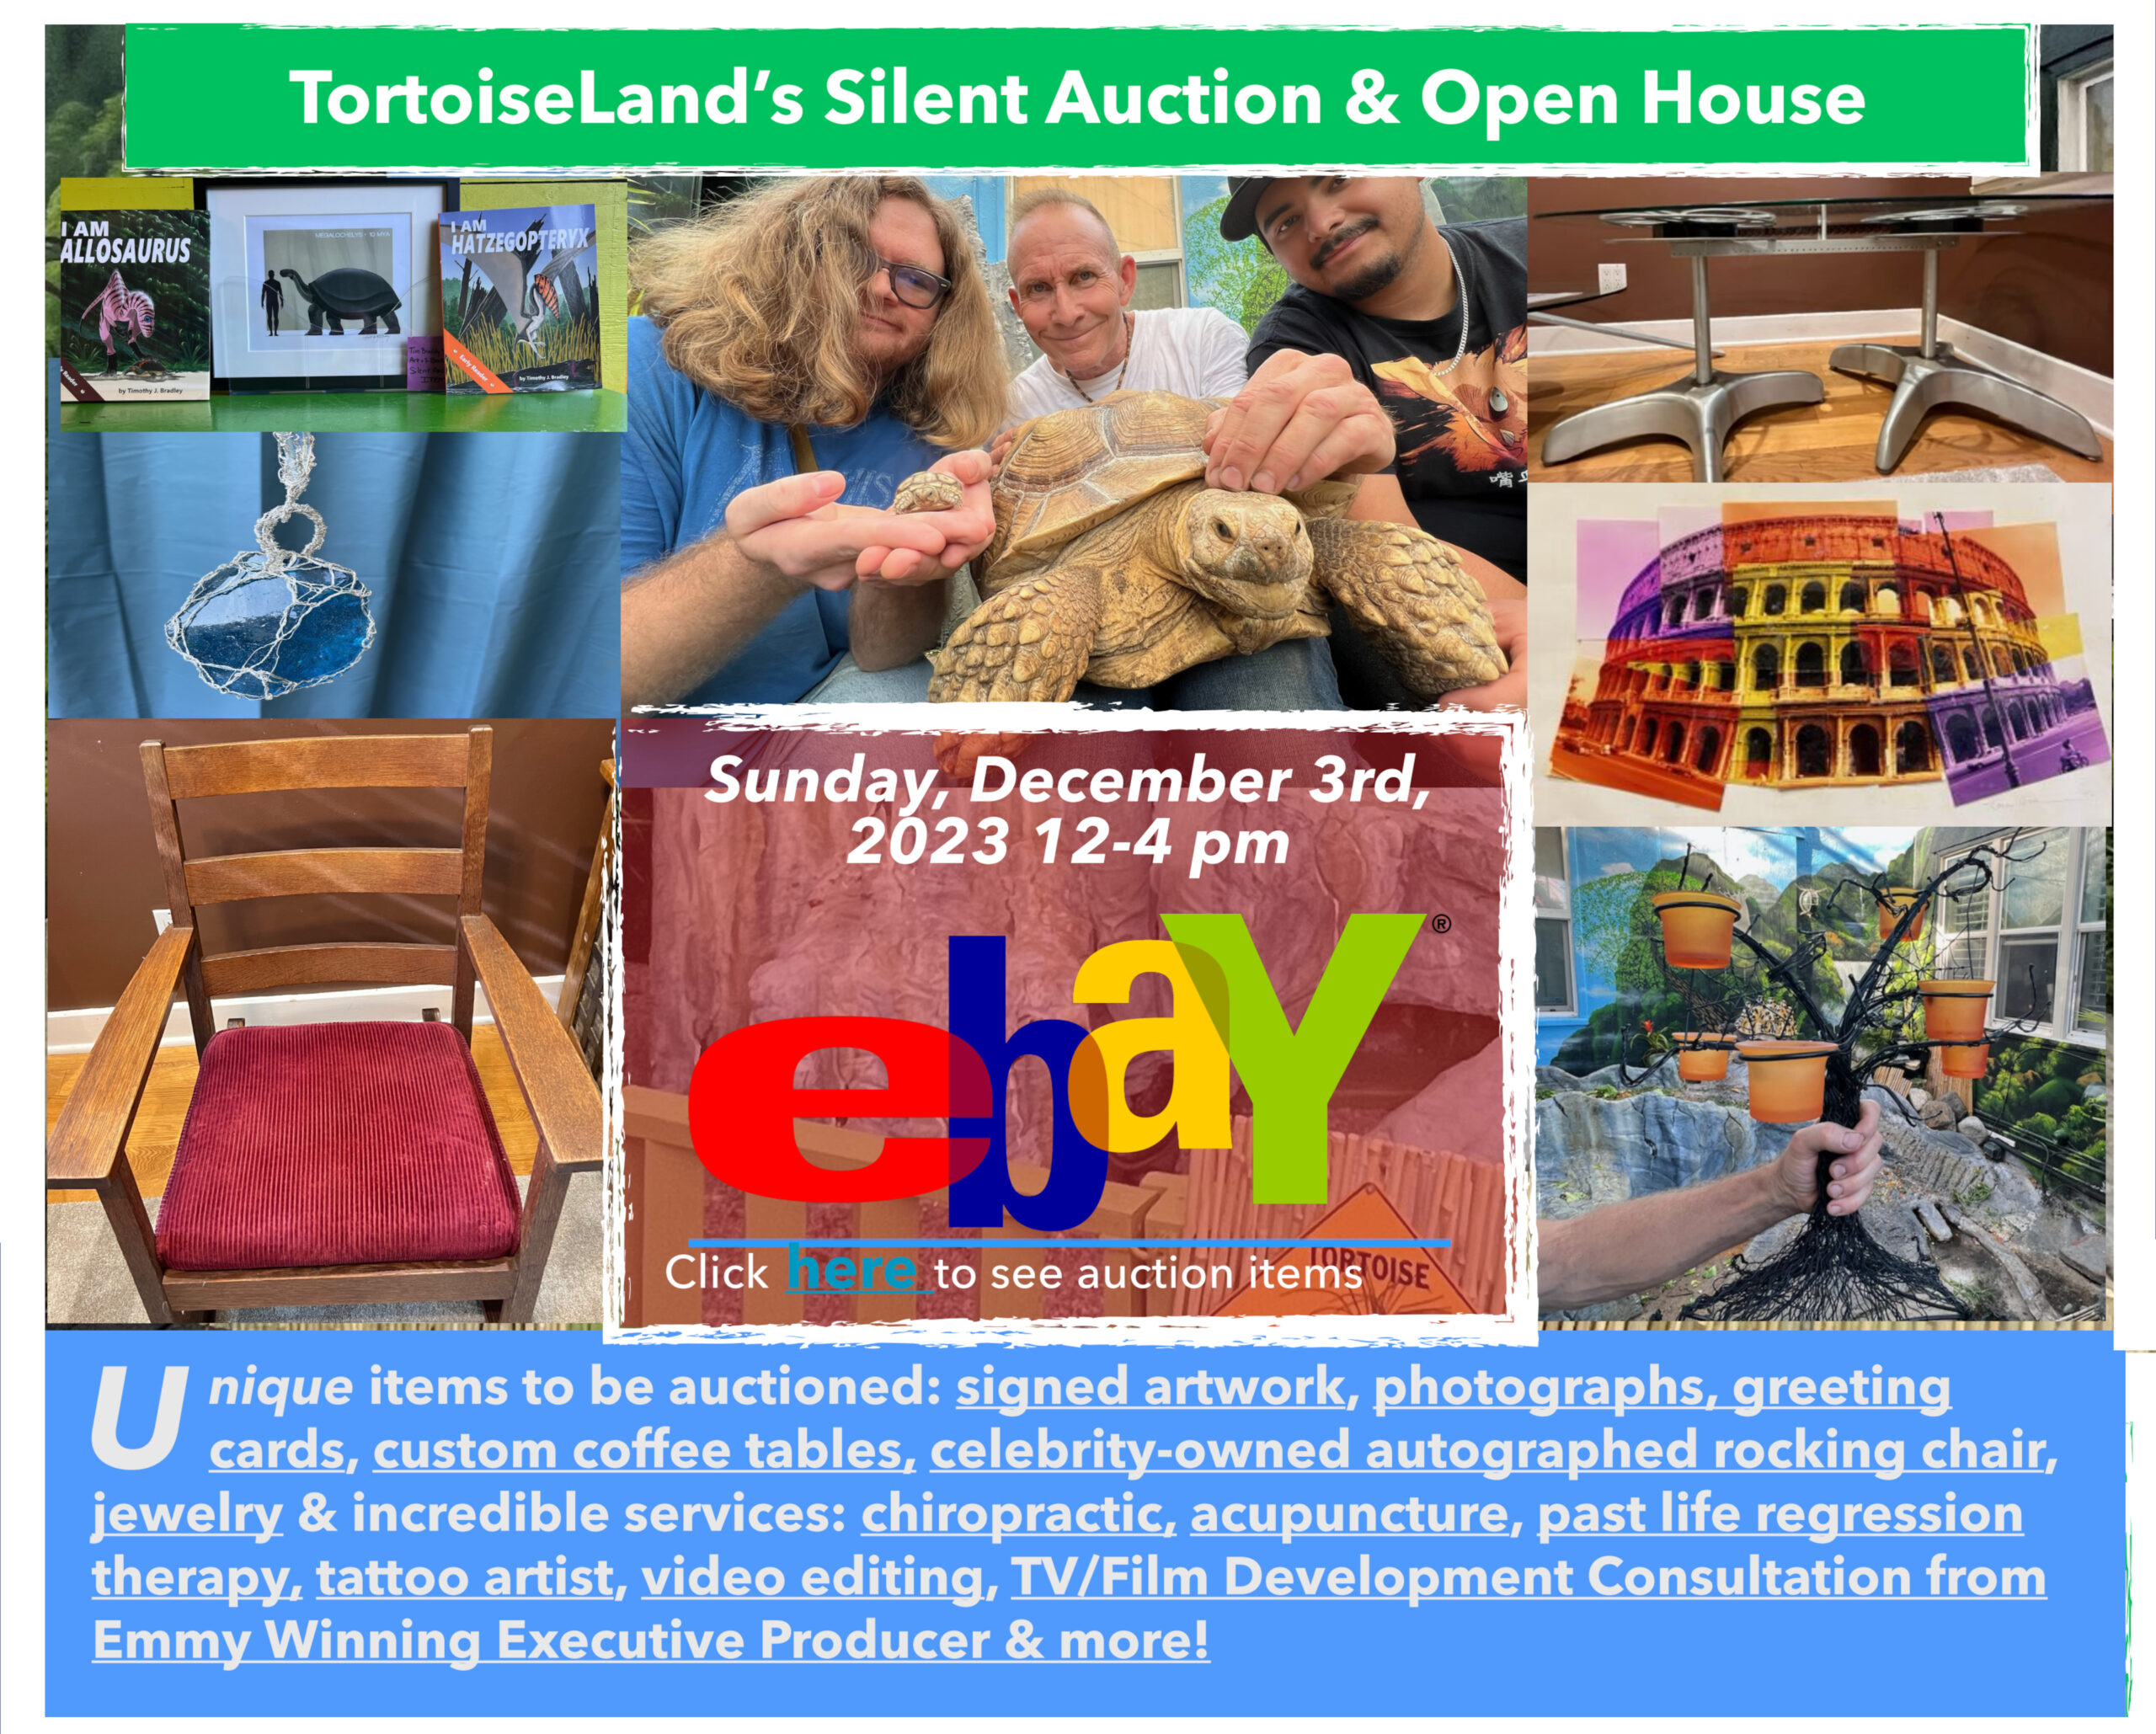 Event flyer for TortoiseLand auction and open house on 12/3/2023